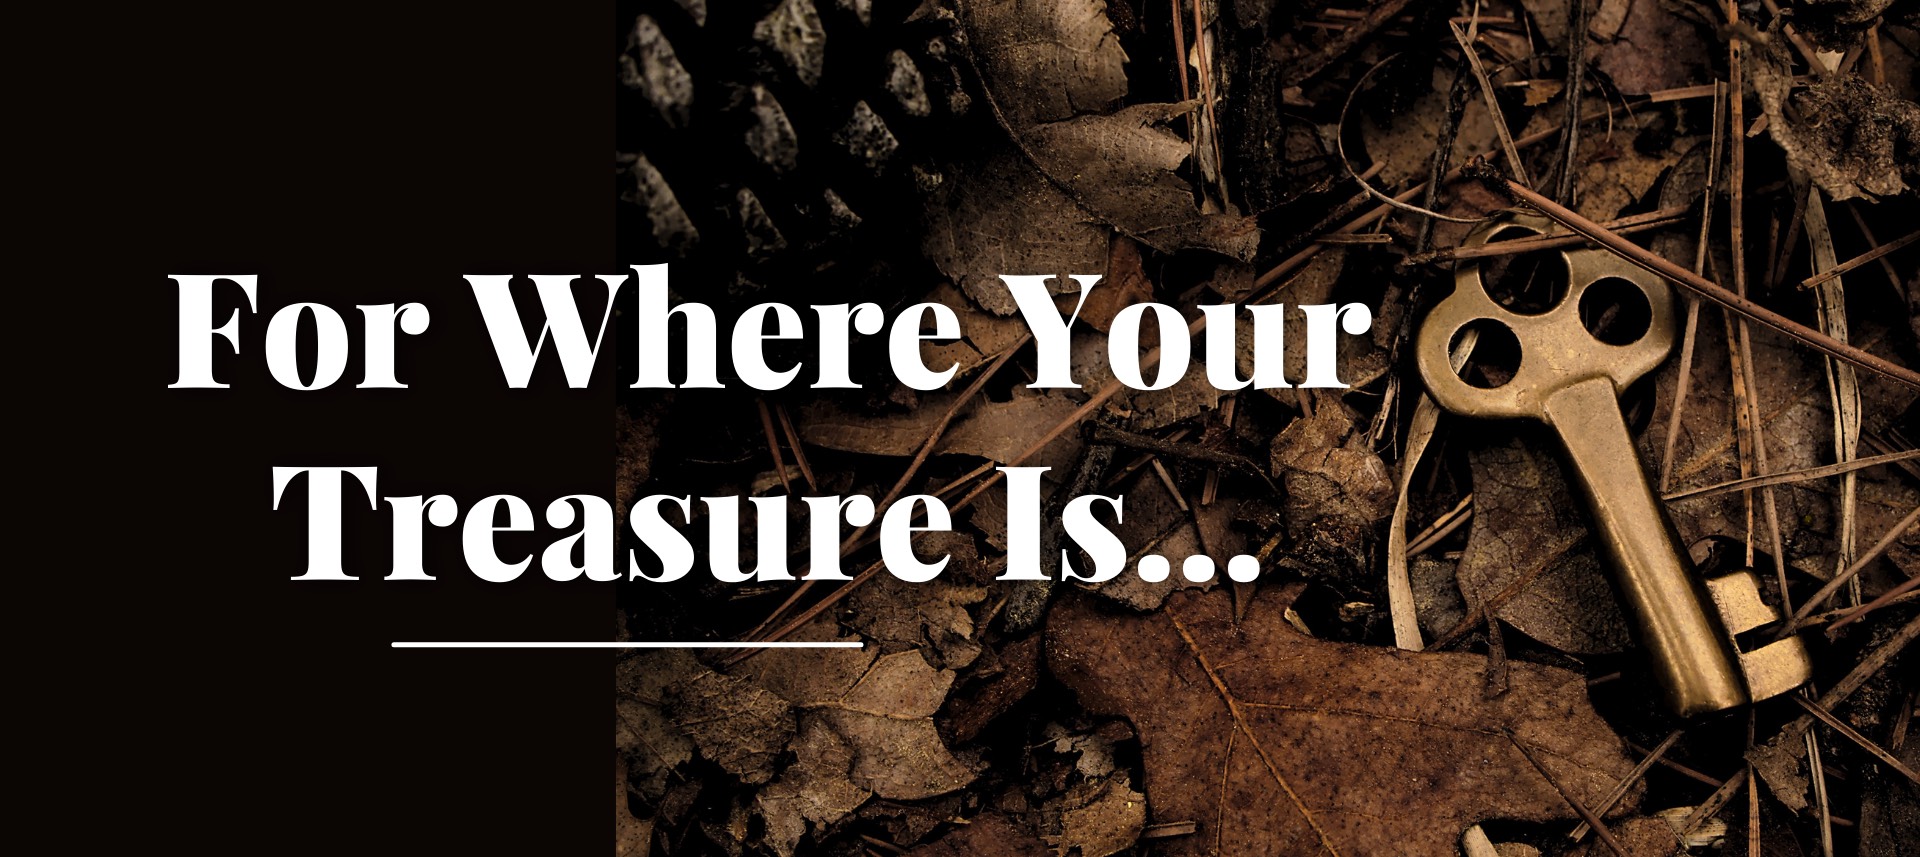 For Where Your Treasure Is...